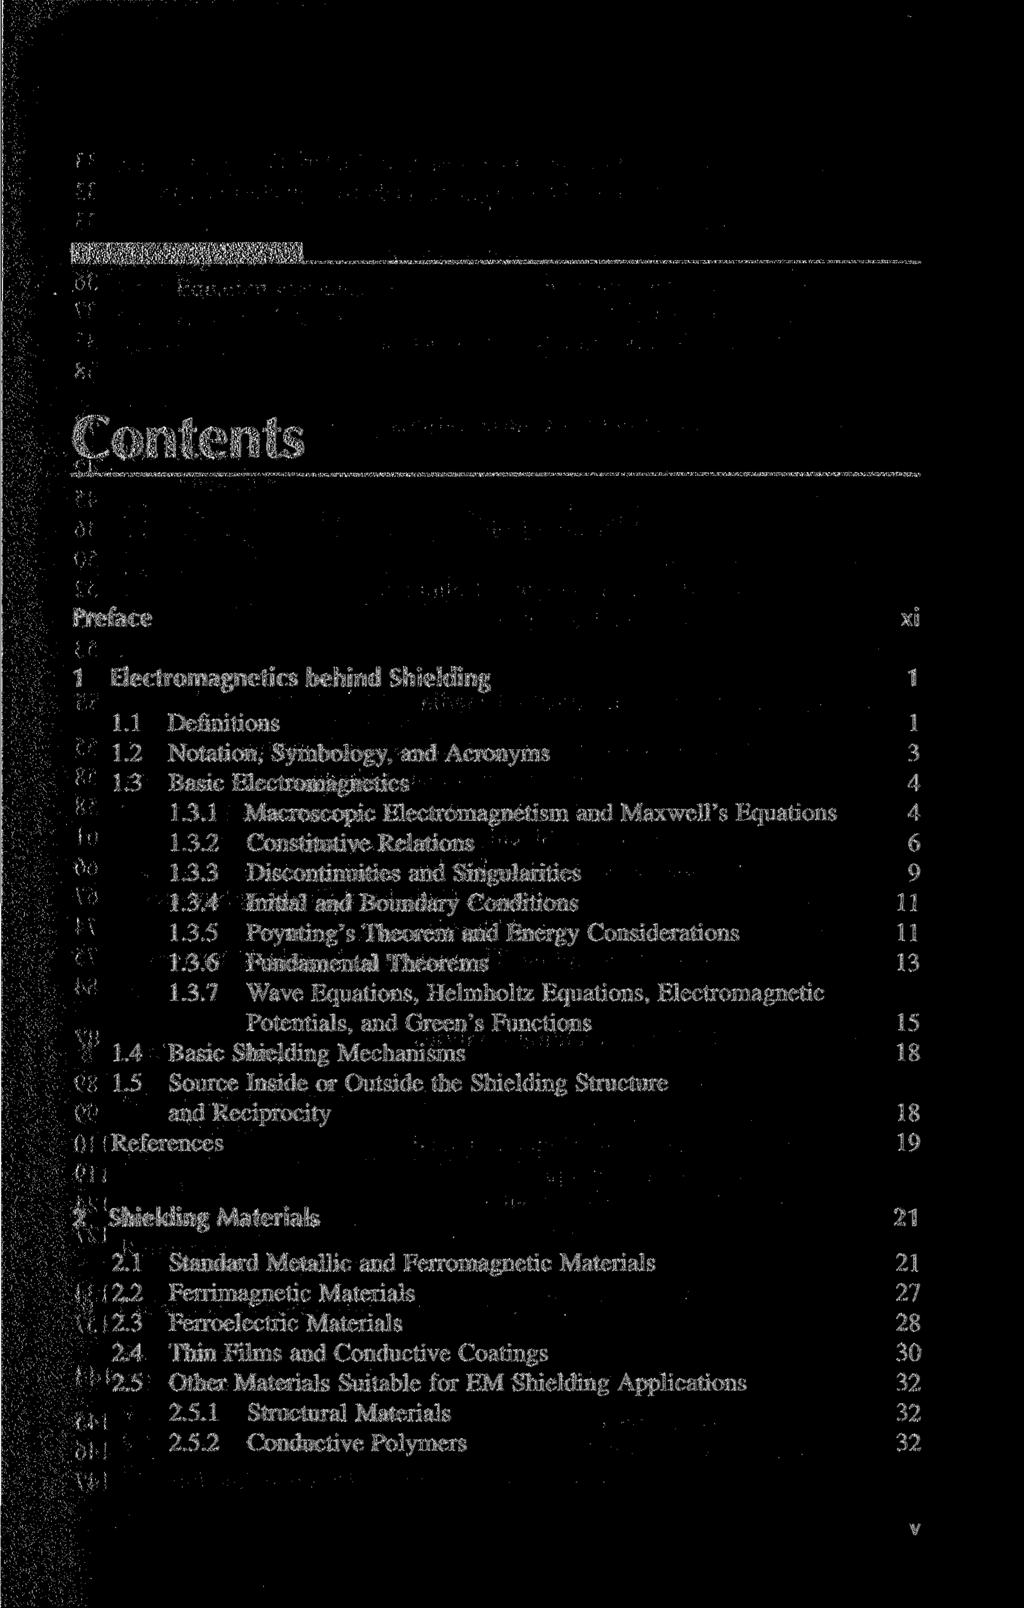 Contents Preface xi 1 Electromagnetics behind Shielding 1 1.1 Definitions 1 1.2 Notation, Symbology, and Acronyms 3 1.3 Basic Electromagnetics 4 1.3.1 Macroscopic Electromagnetism and Maxwell's Equations 4 1.